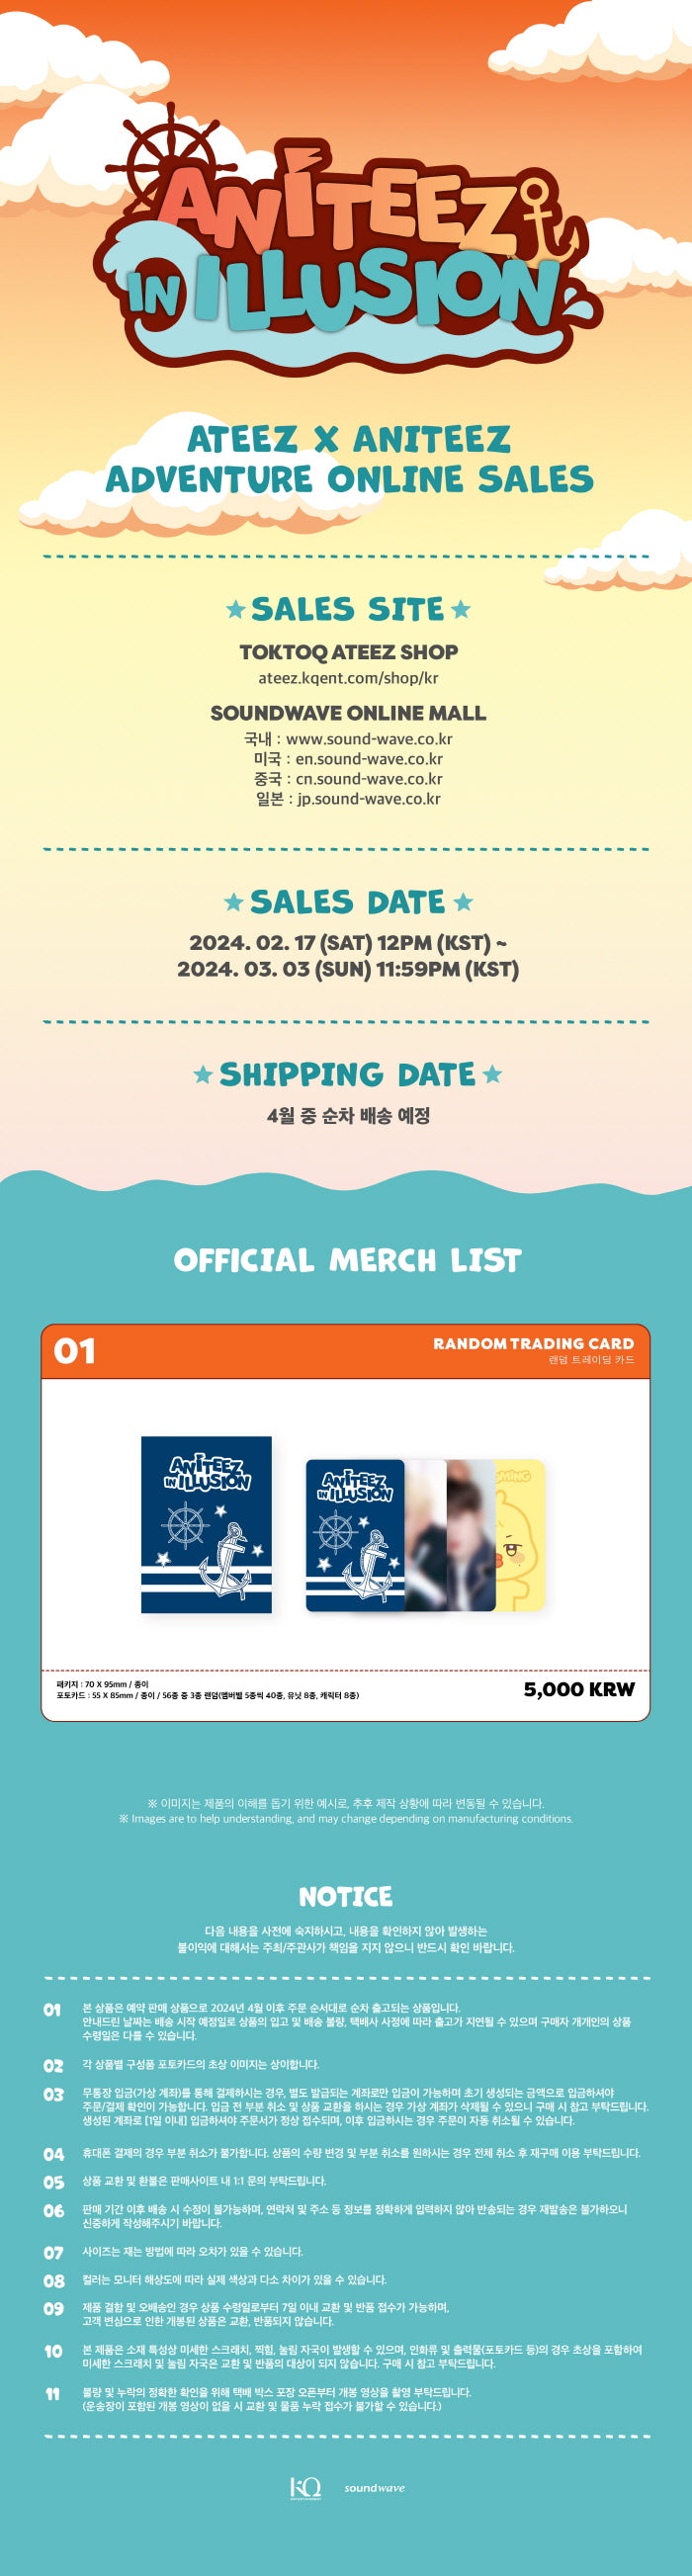 ATEEZ - ANITEEZ IN ILLUSION OFFICIAL MD RANDOM TRADING CARD Infographic